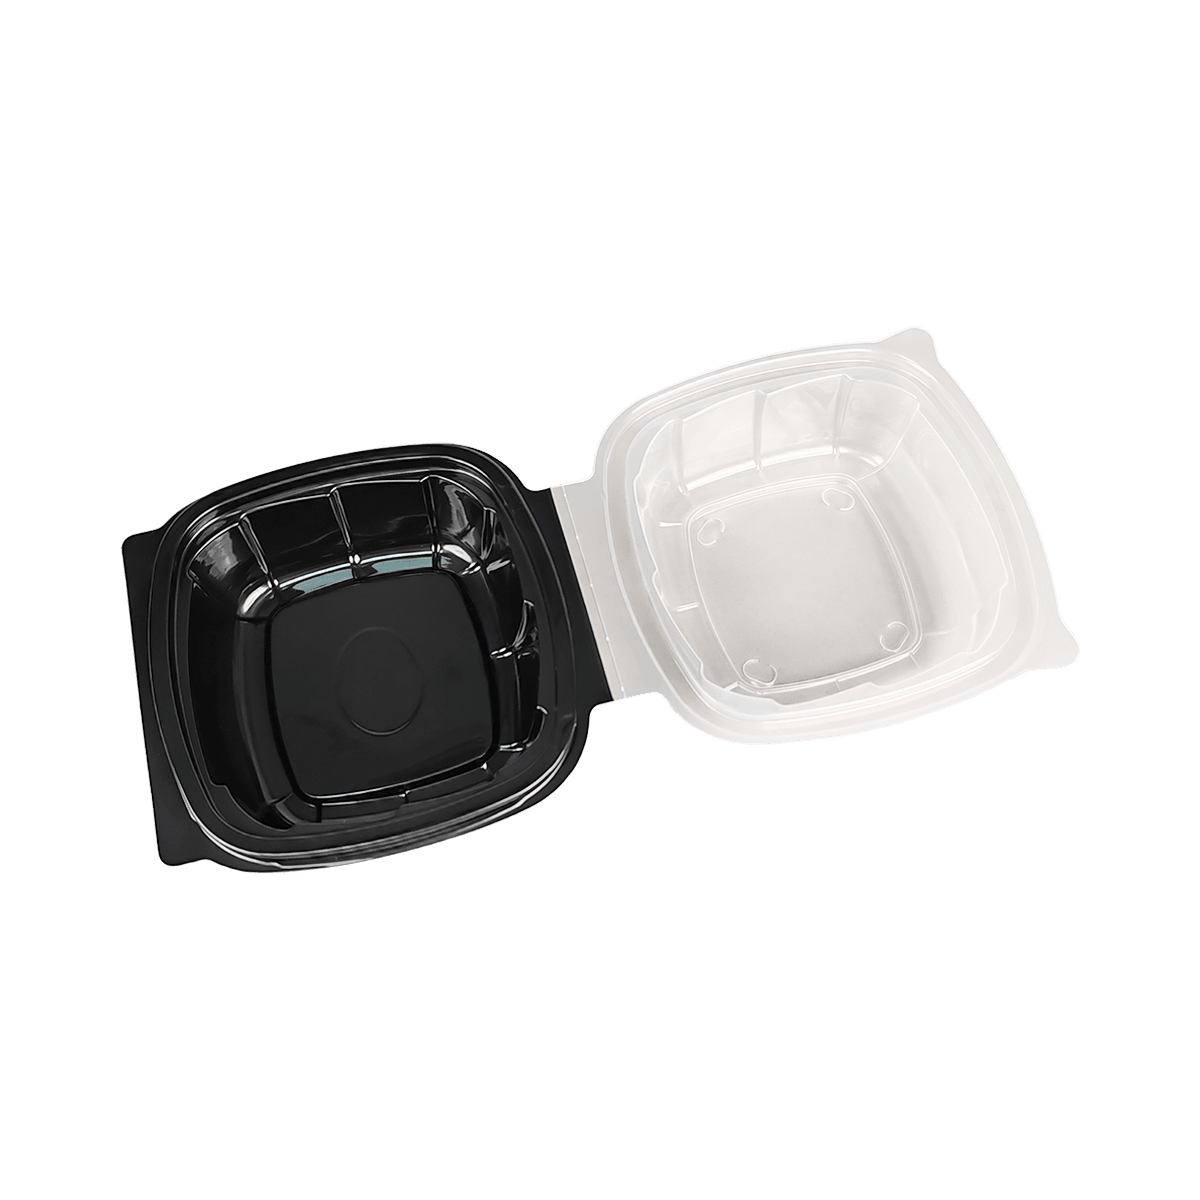 ZK-PP-037 Reusable Black PP Packaging Containers Suitable For Travel, Camping, Picnics